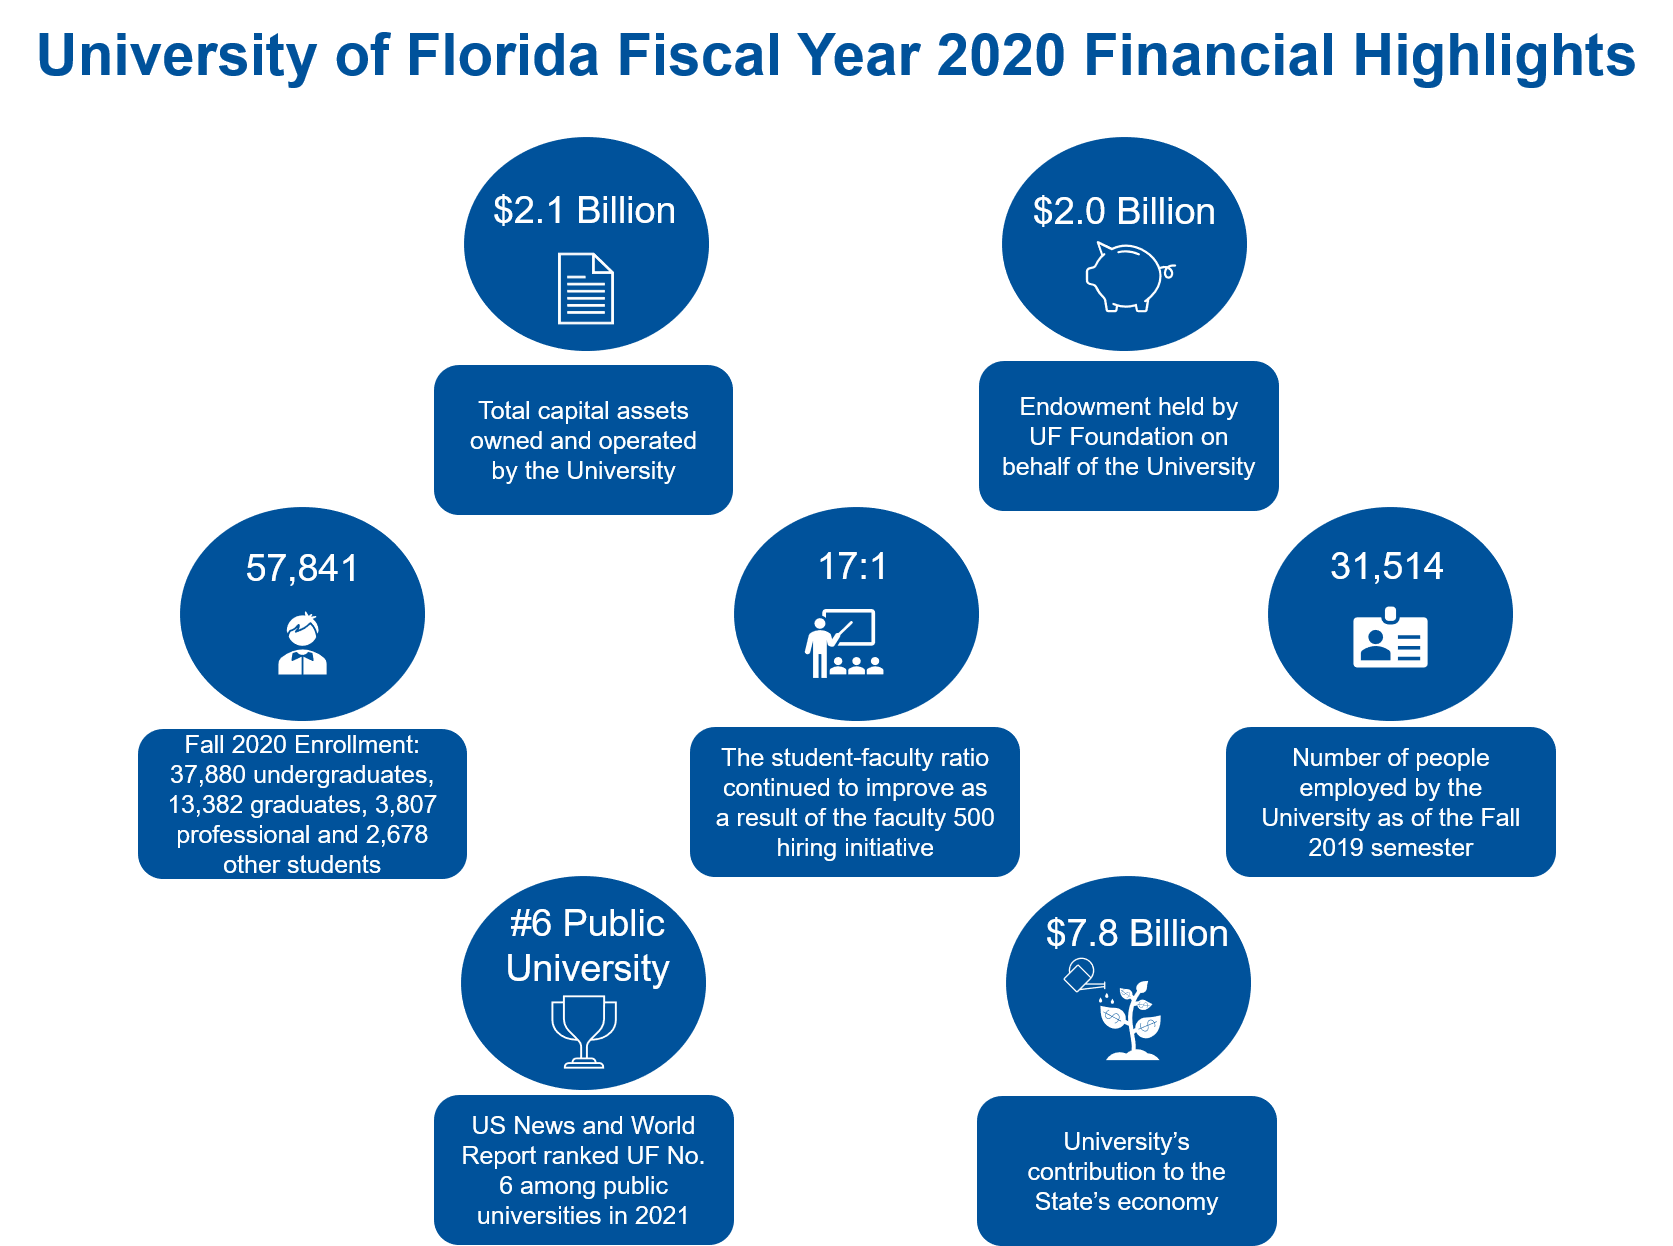 Financial Highlights Fiscal Year 2020